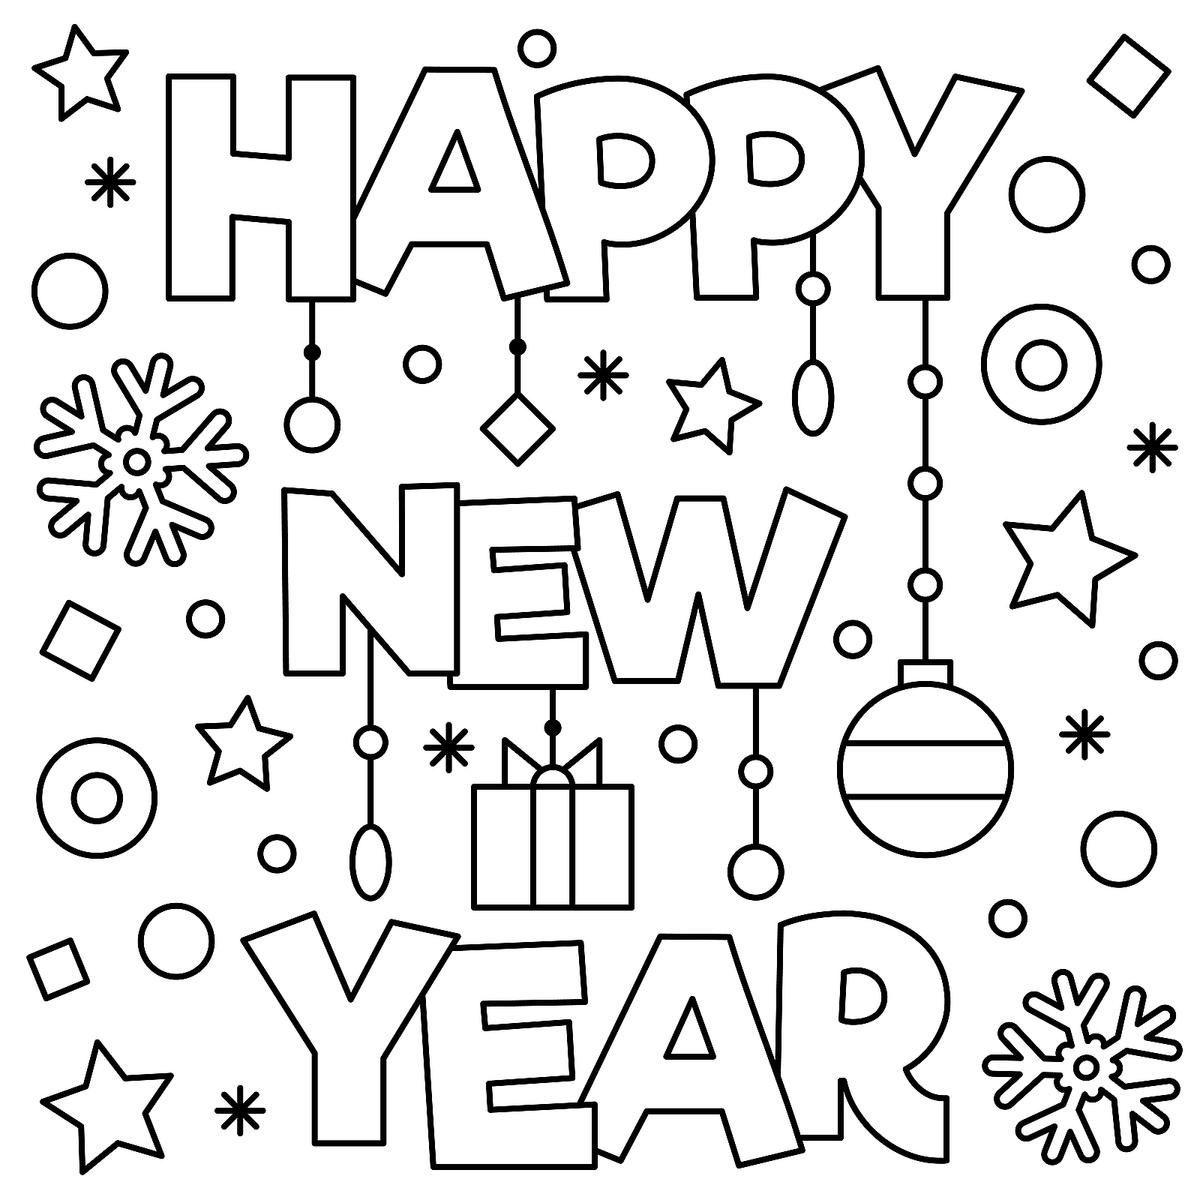 New Year Coloring Pages For Kids at GetDrawings Free download